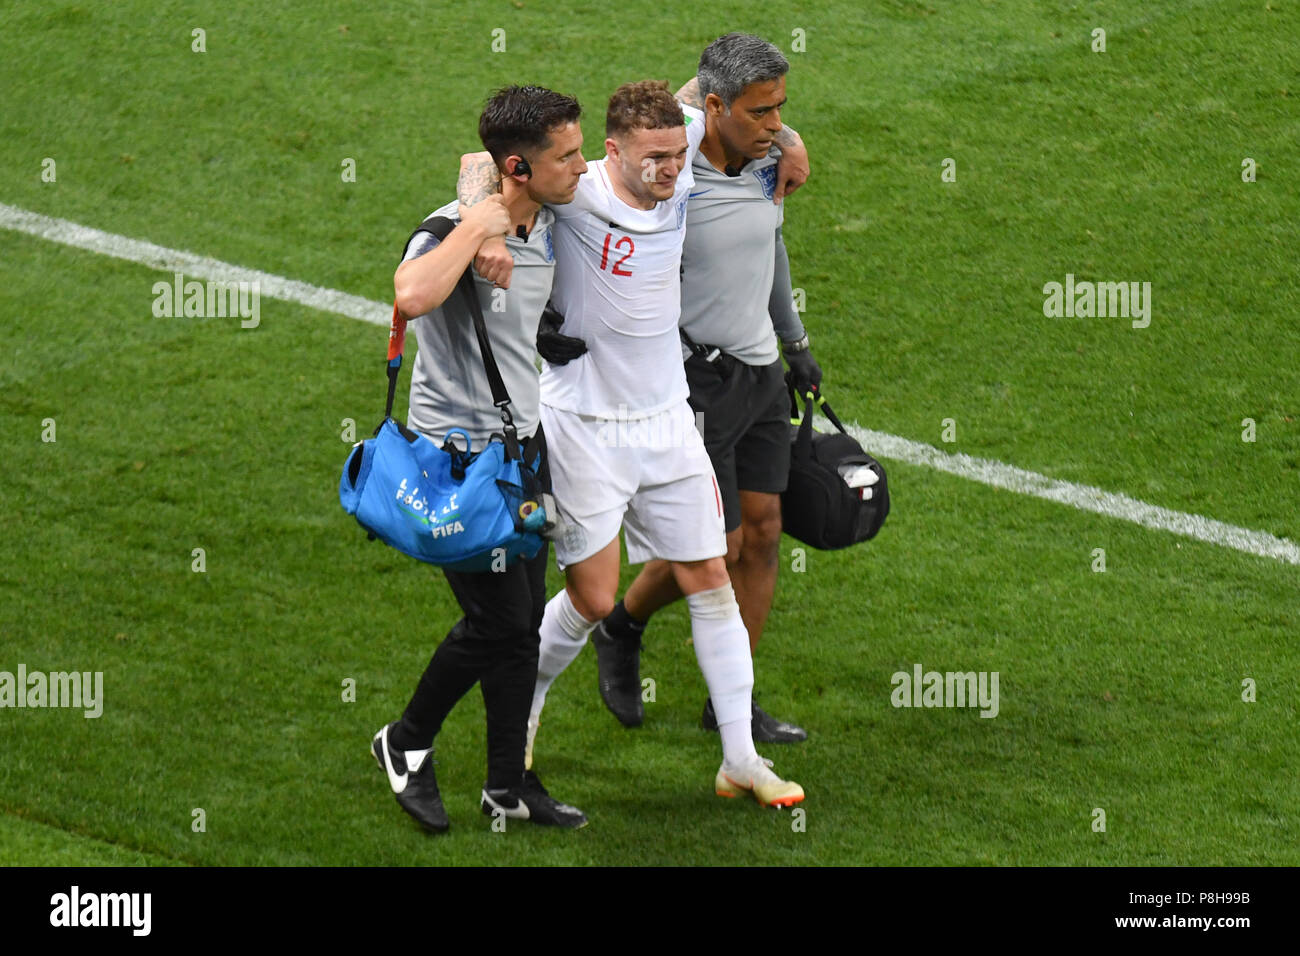 Moscow, Russia. 11th July, 2018.  KIERAN TRIPPIER (ENG) is guided off the court, injured, injury. Croatia (CRO) - England (ENG) 2-1 nV Semifinals, Round of Four, Match 62 on 07/11/2018 in Moscow, Luzhniki Stadium, Football World Cup 2018 in Russia from 14.06. - 15.07.2018. | usage worldwide Credit: dpa/Alamy Live News Credit: dpa picture alliance/Alamy Live News Stock Photo